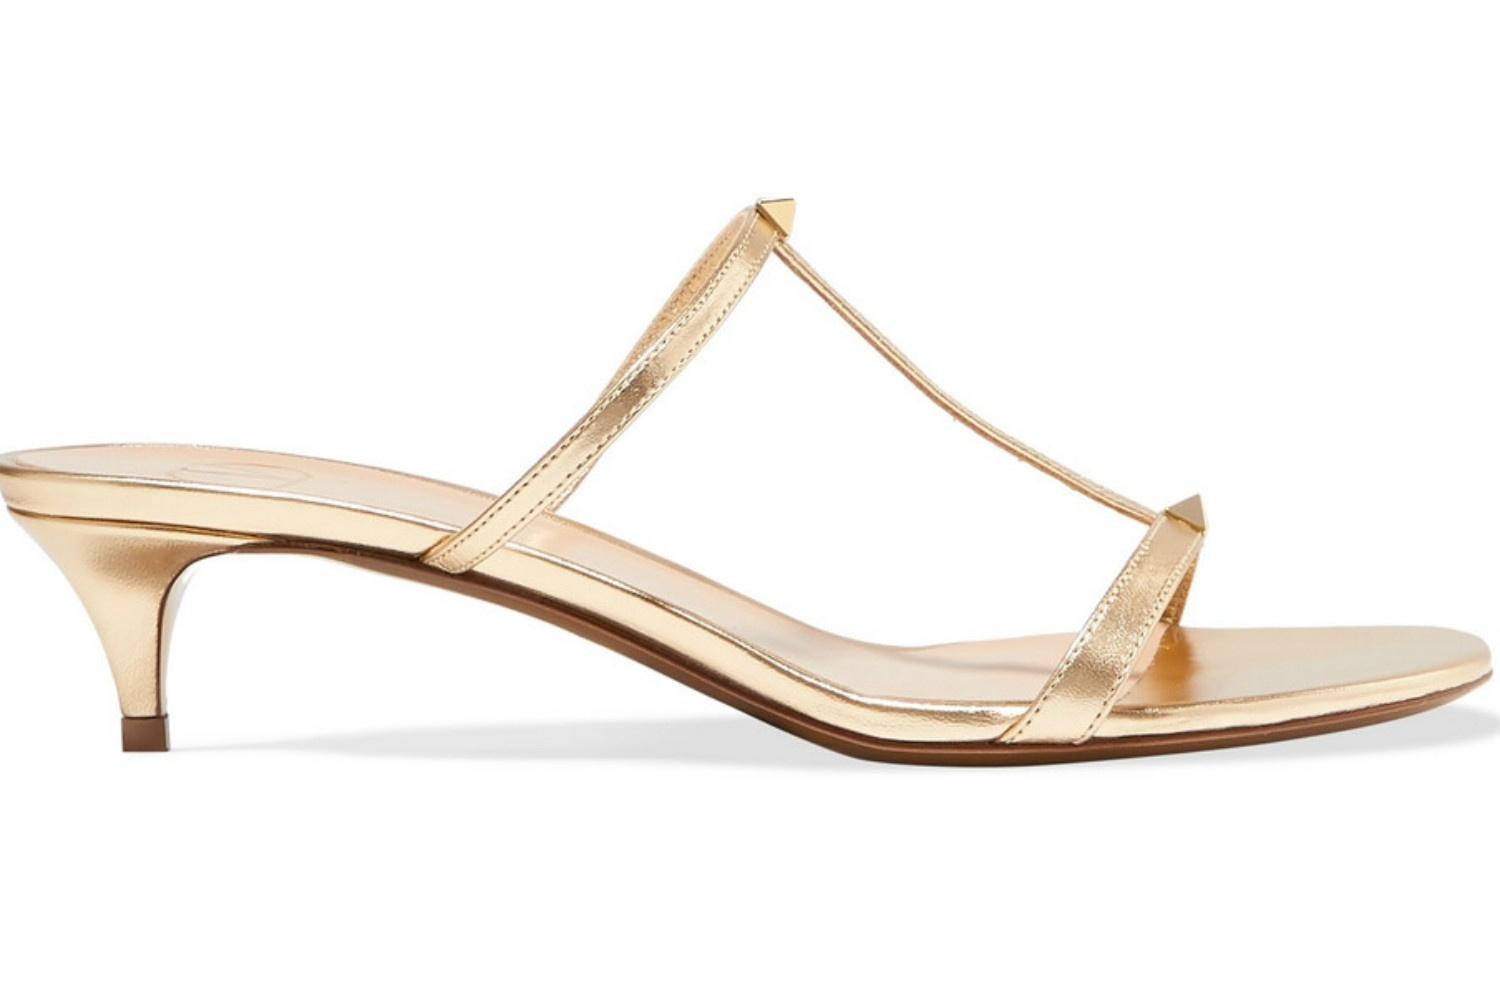 40 of the Best Wedding Sandals - hitched.co.uk - hitched.co.uk